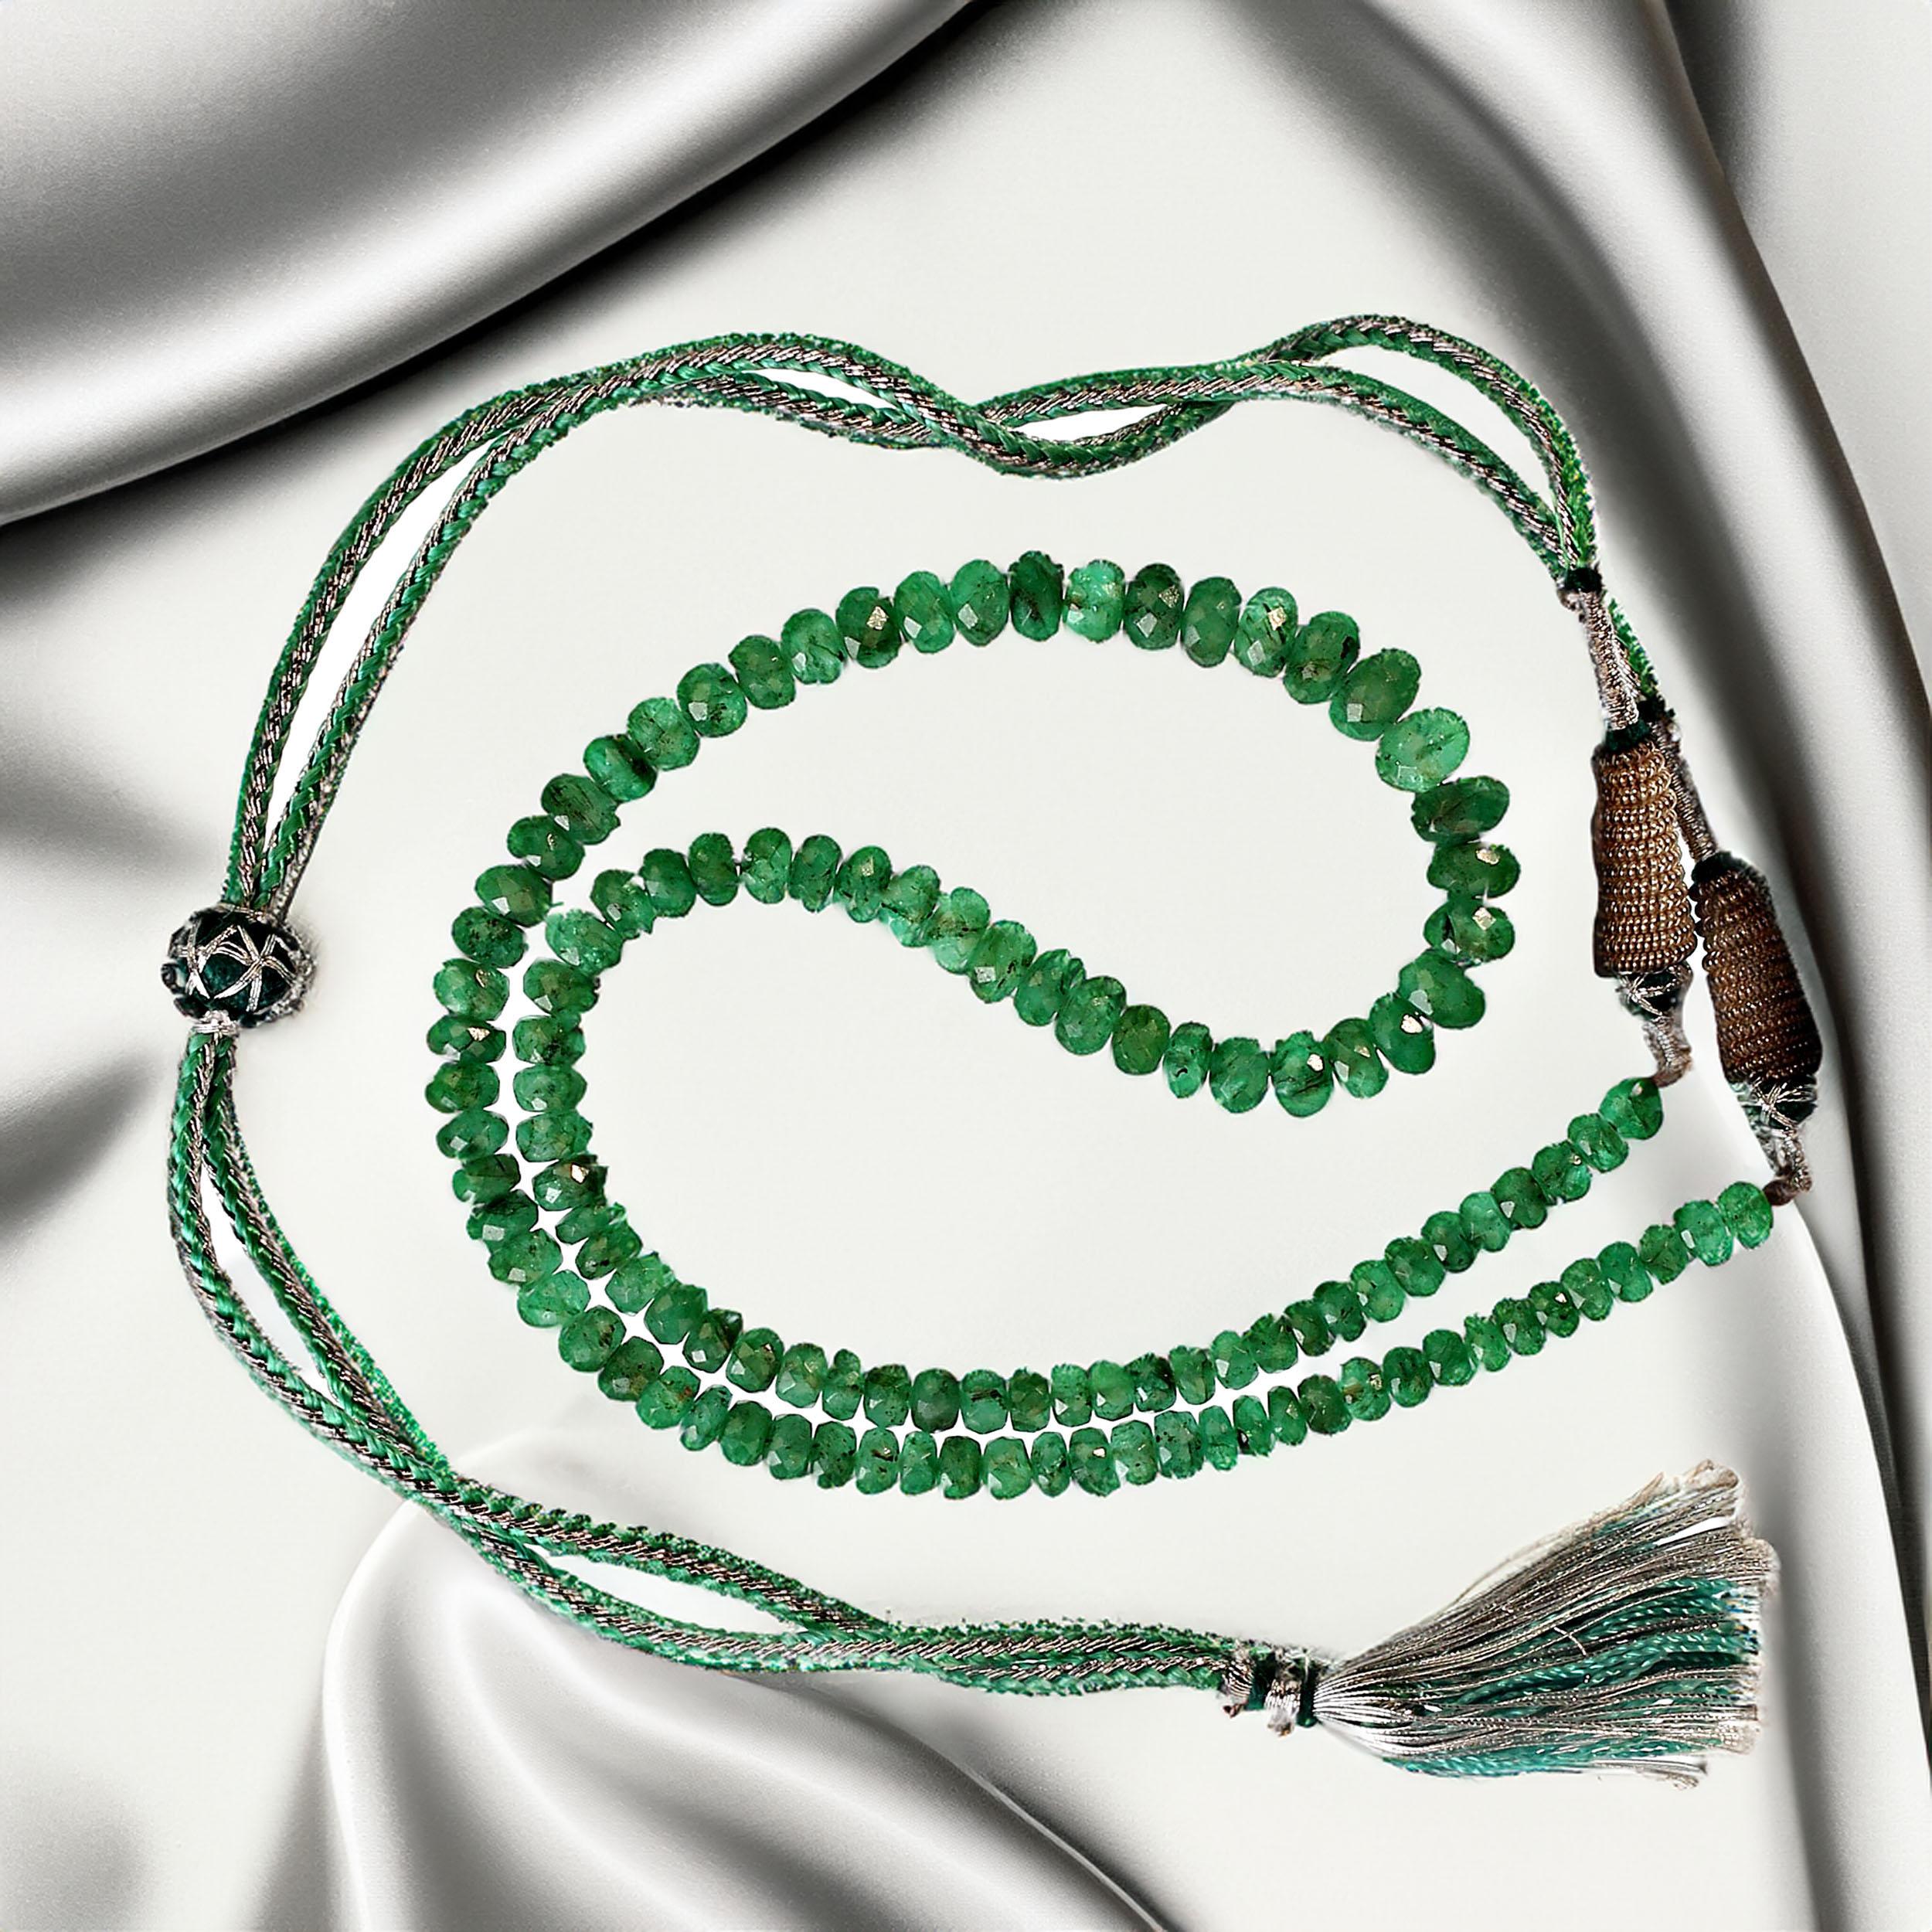 15 Inch graduated emerald necklace, 5-7mm, with extendable cord for easily slipping over your head. These gorgeous translucent Indian emeralds, 95ct, are faceted and create a lovely necklace to wear with all your fall wardrobe.  MN2339